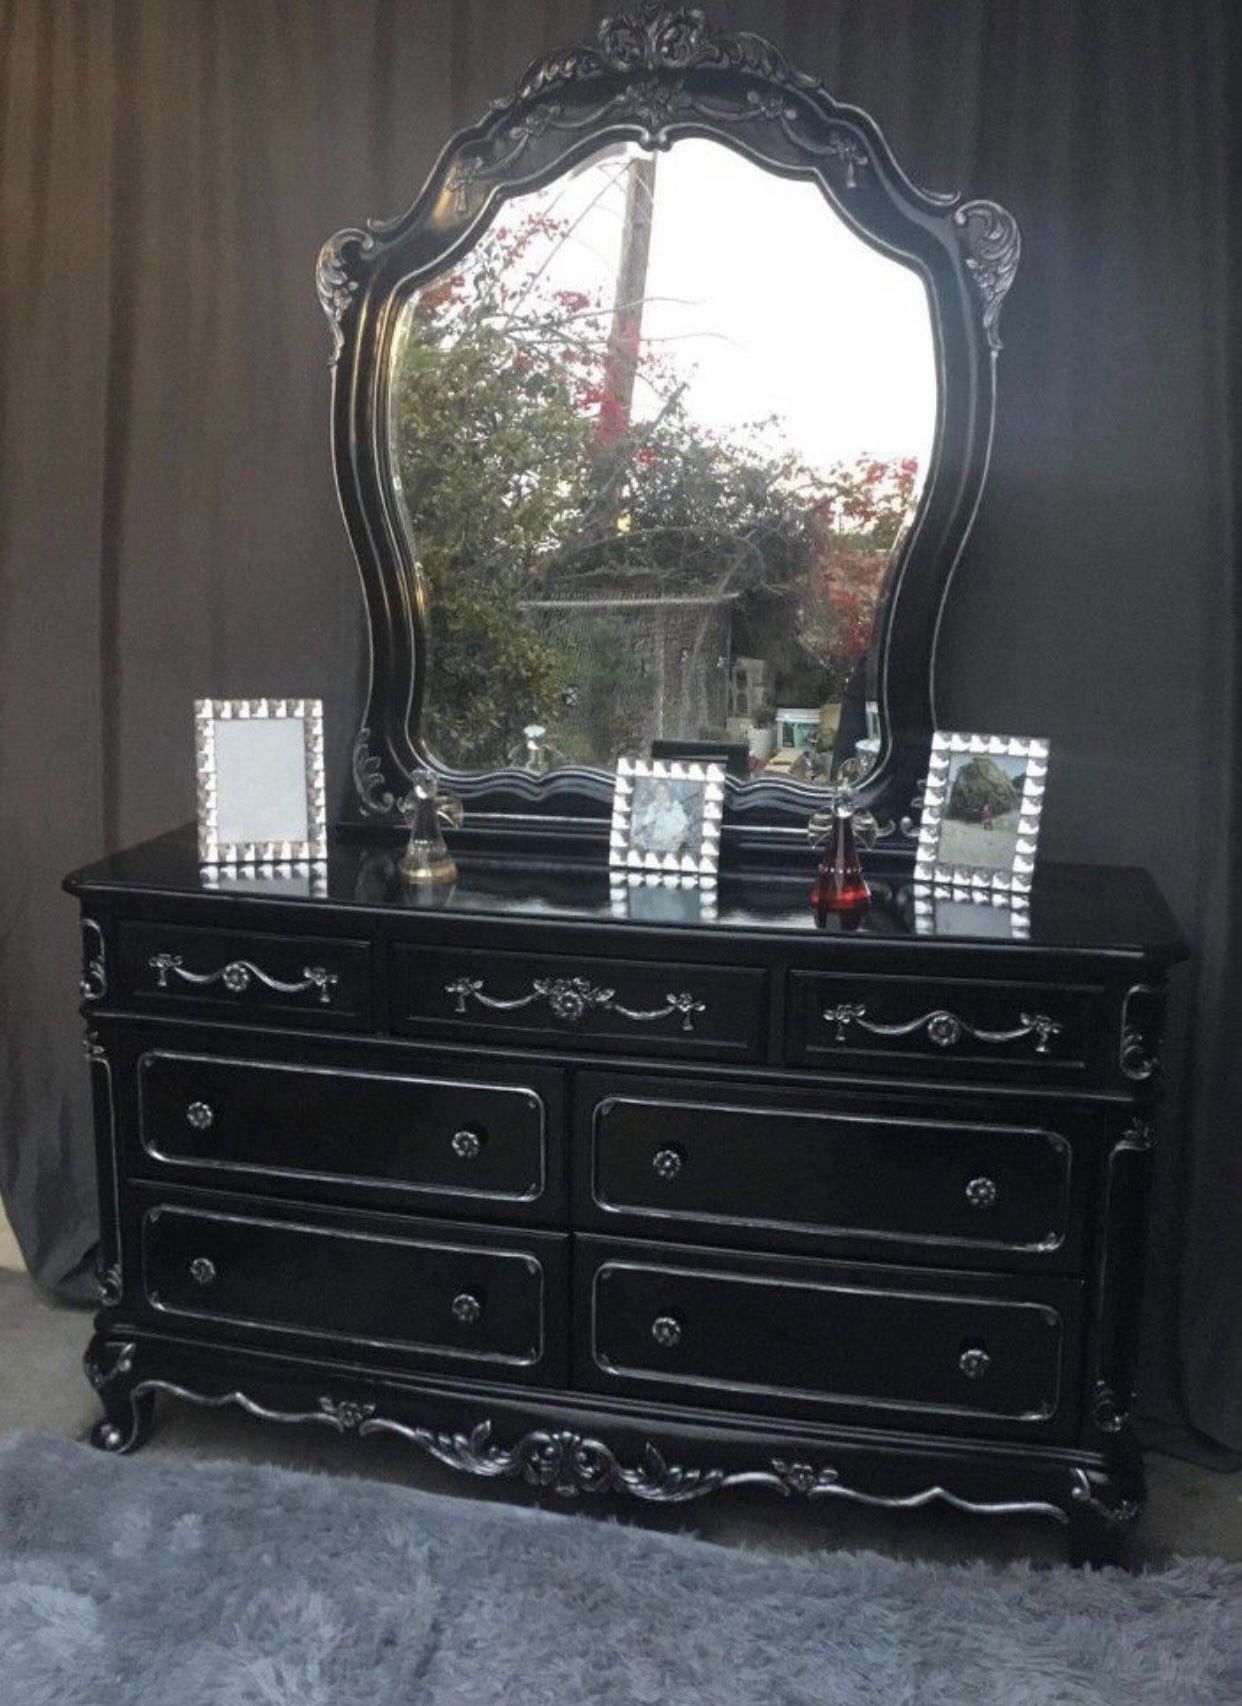 Black And Silver Princess Style Long Dresser, Mirror, Nightstand Set Has Been Refinish! 🌺